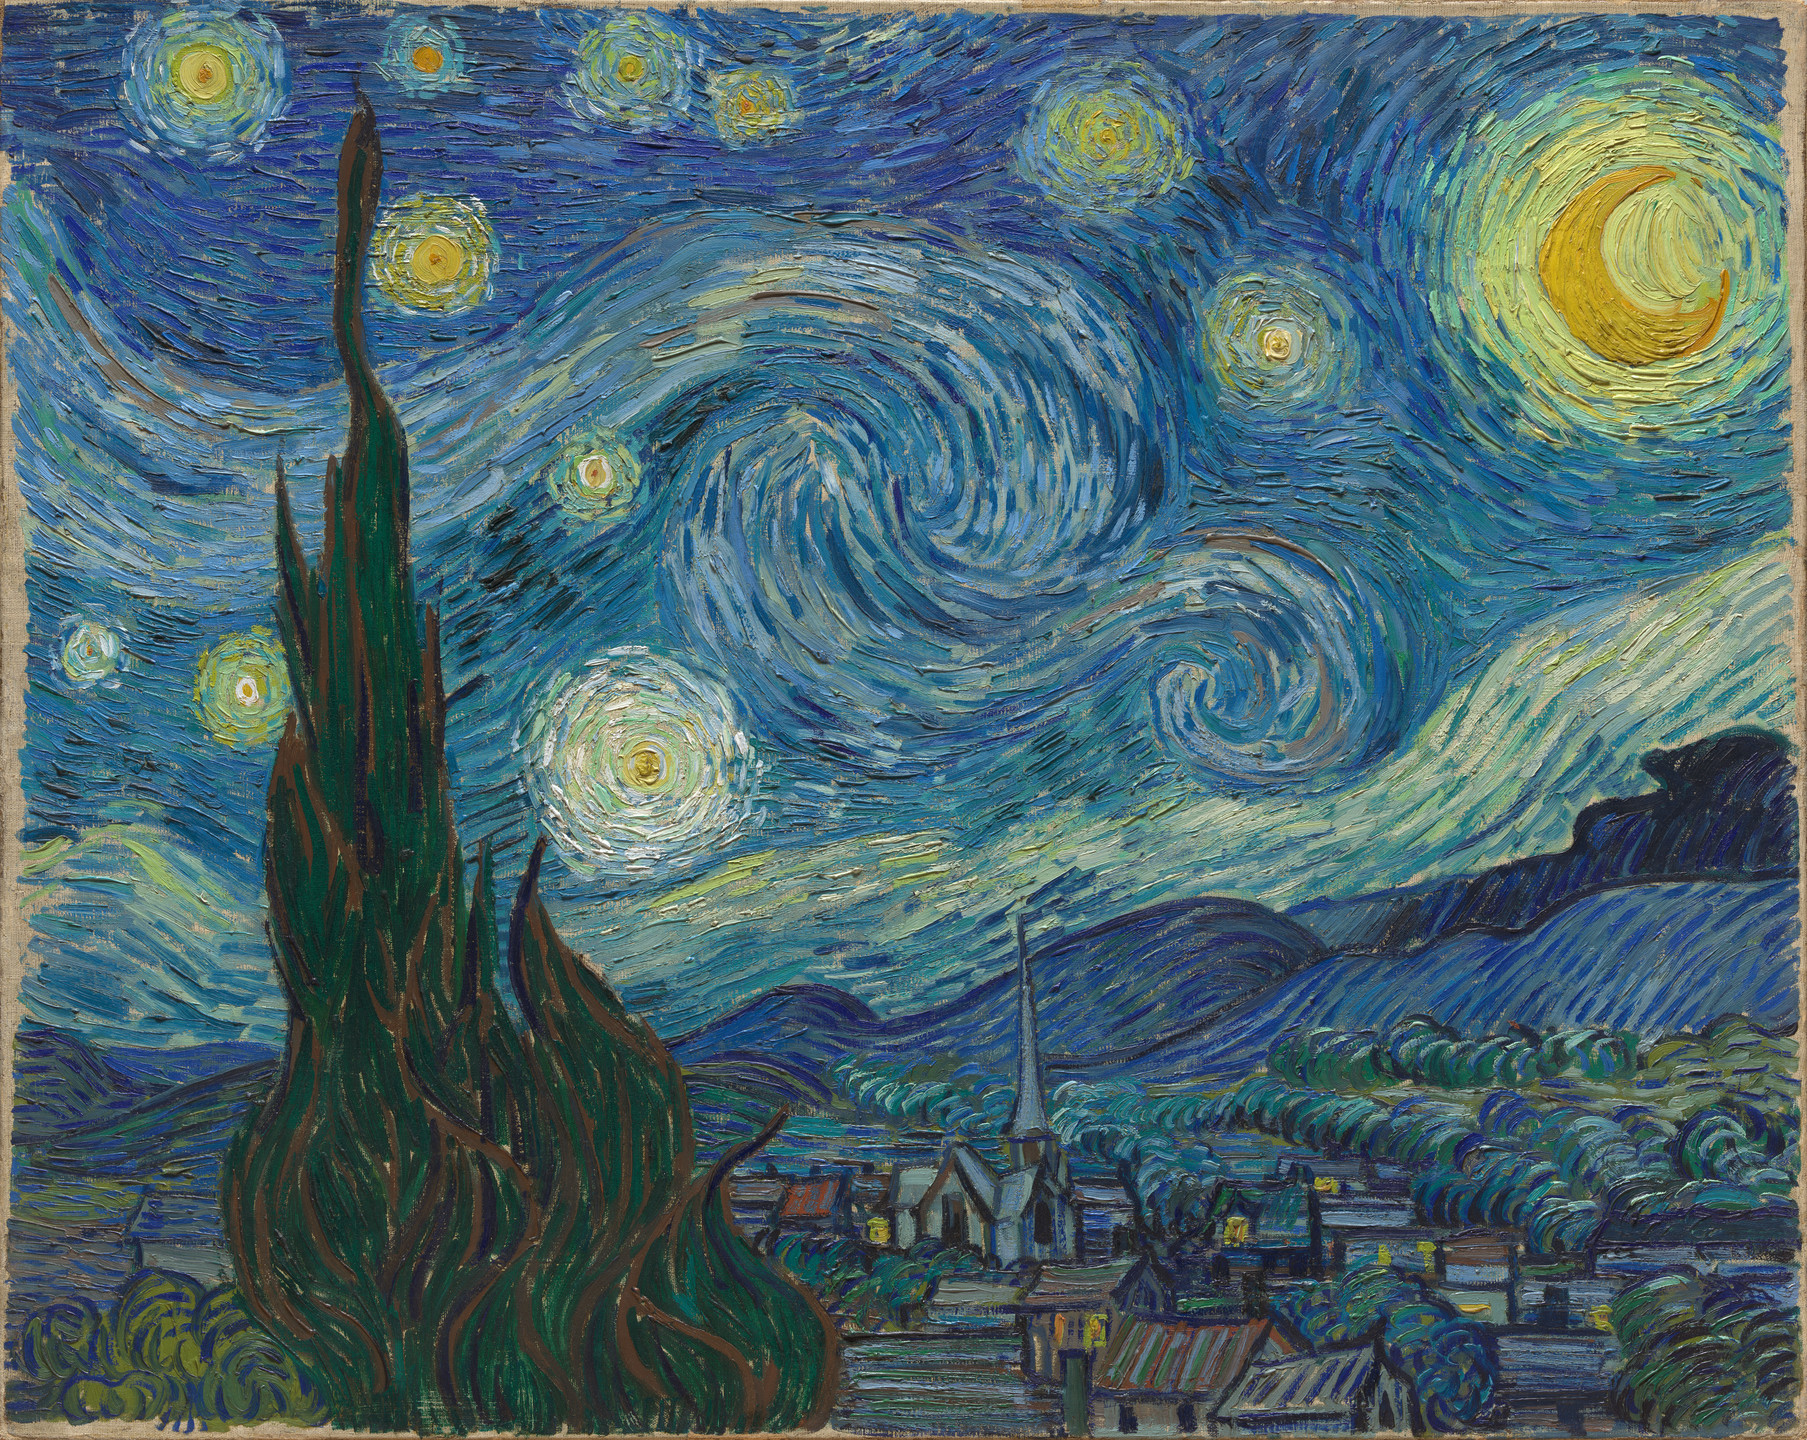 Image of Vincent Van Gogh's Starry Night painting. 